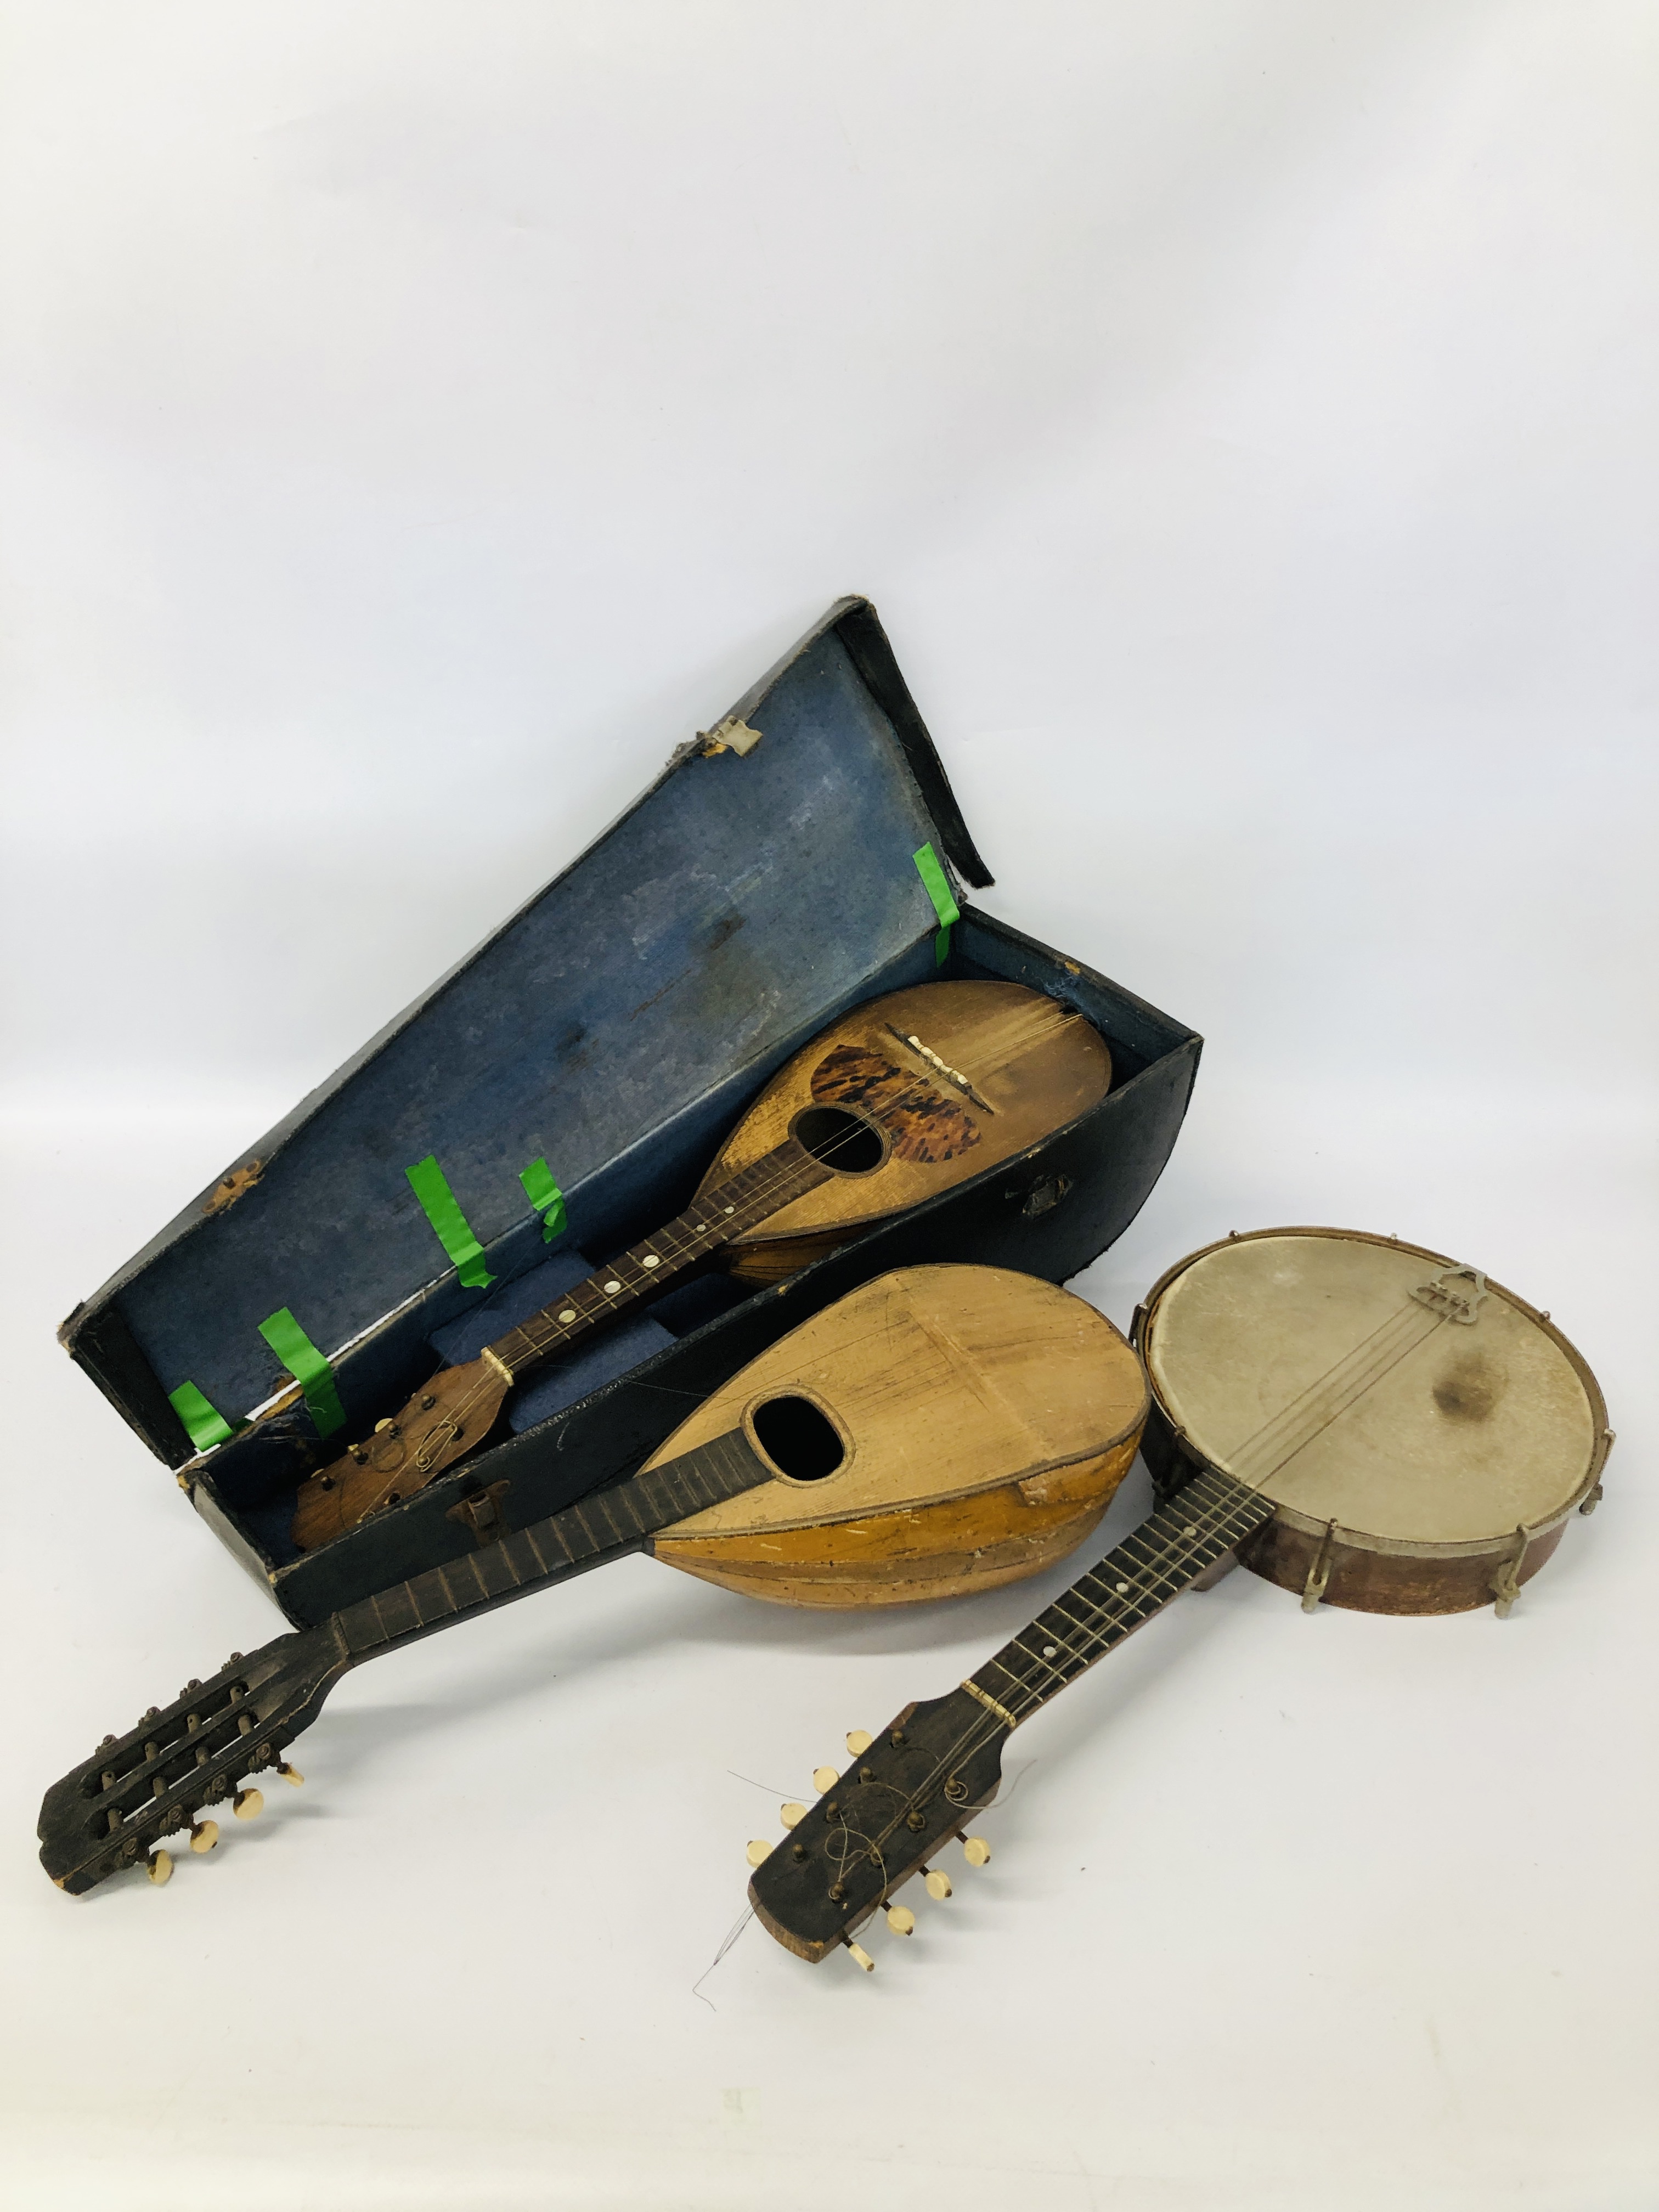 A VINTAGE MANDOLIN WITH TORTOISESHELL DETAIL MARKED "CATANIA" IN FITTED CASE AND ONE OTHER (BOTH